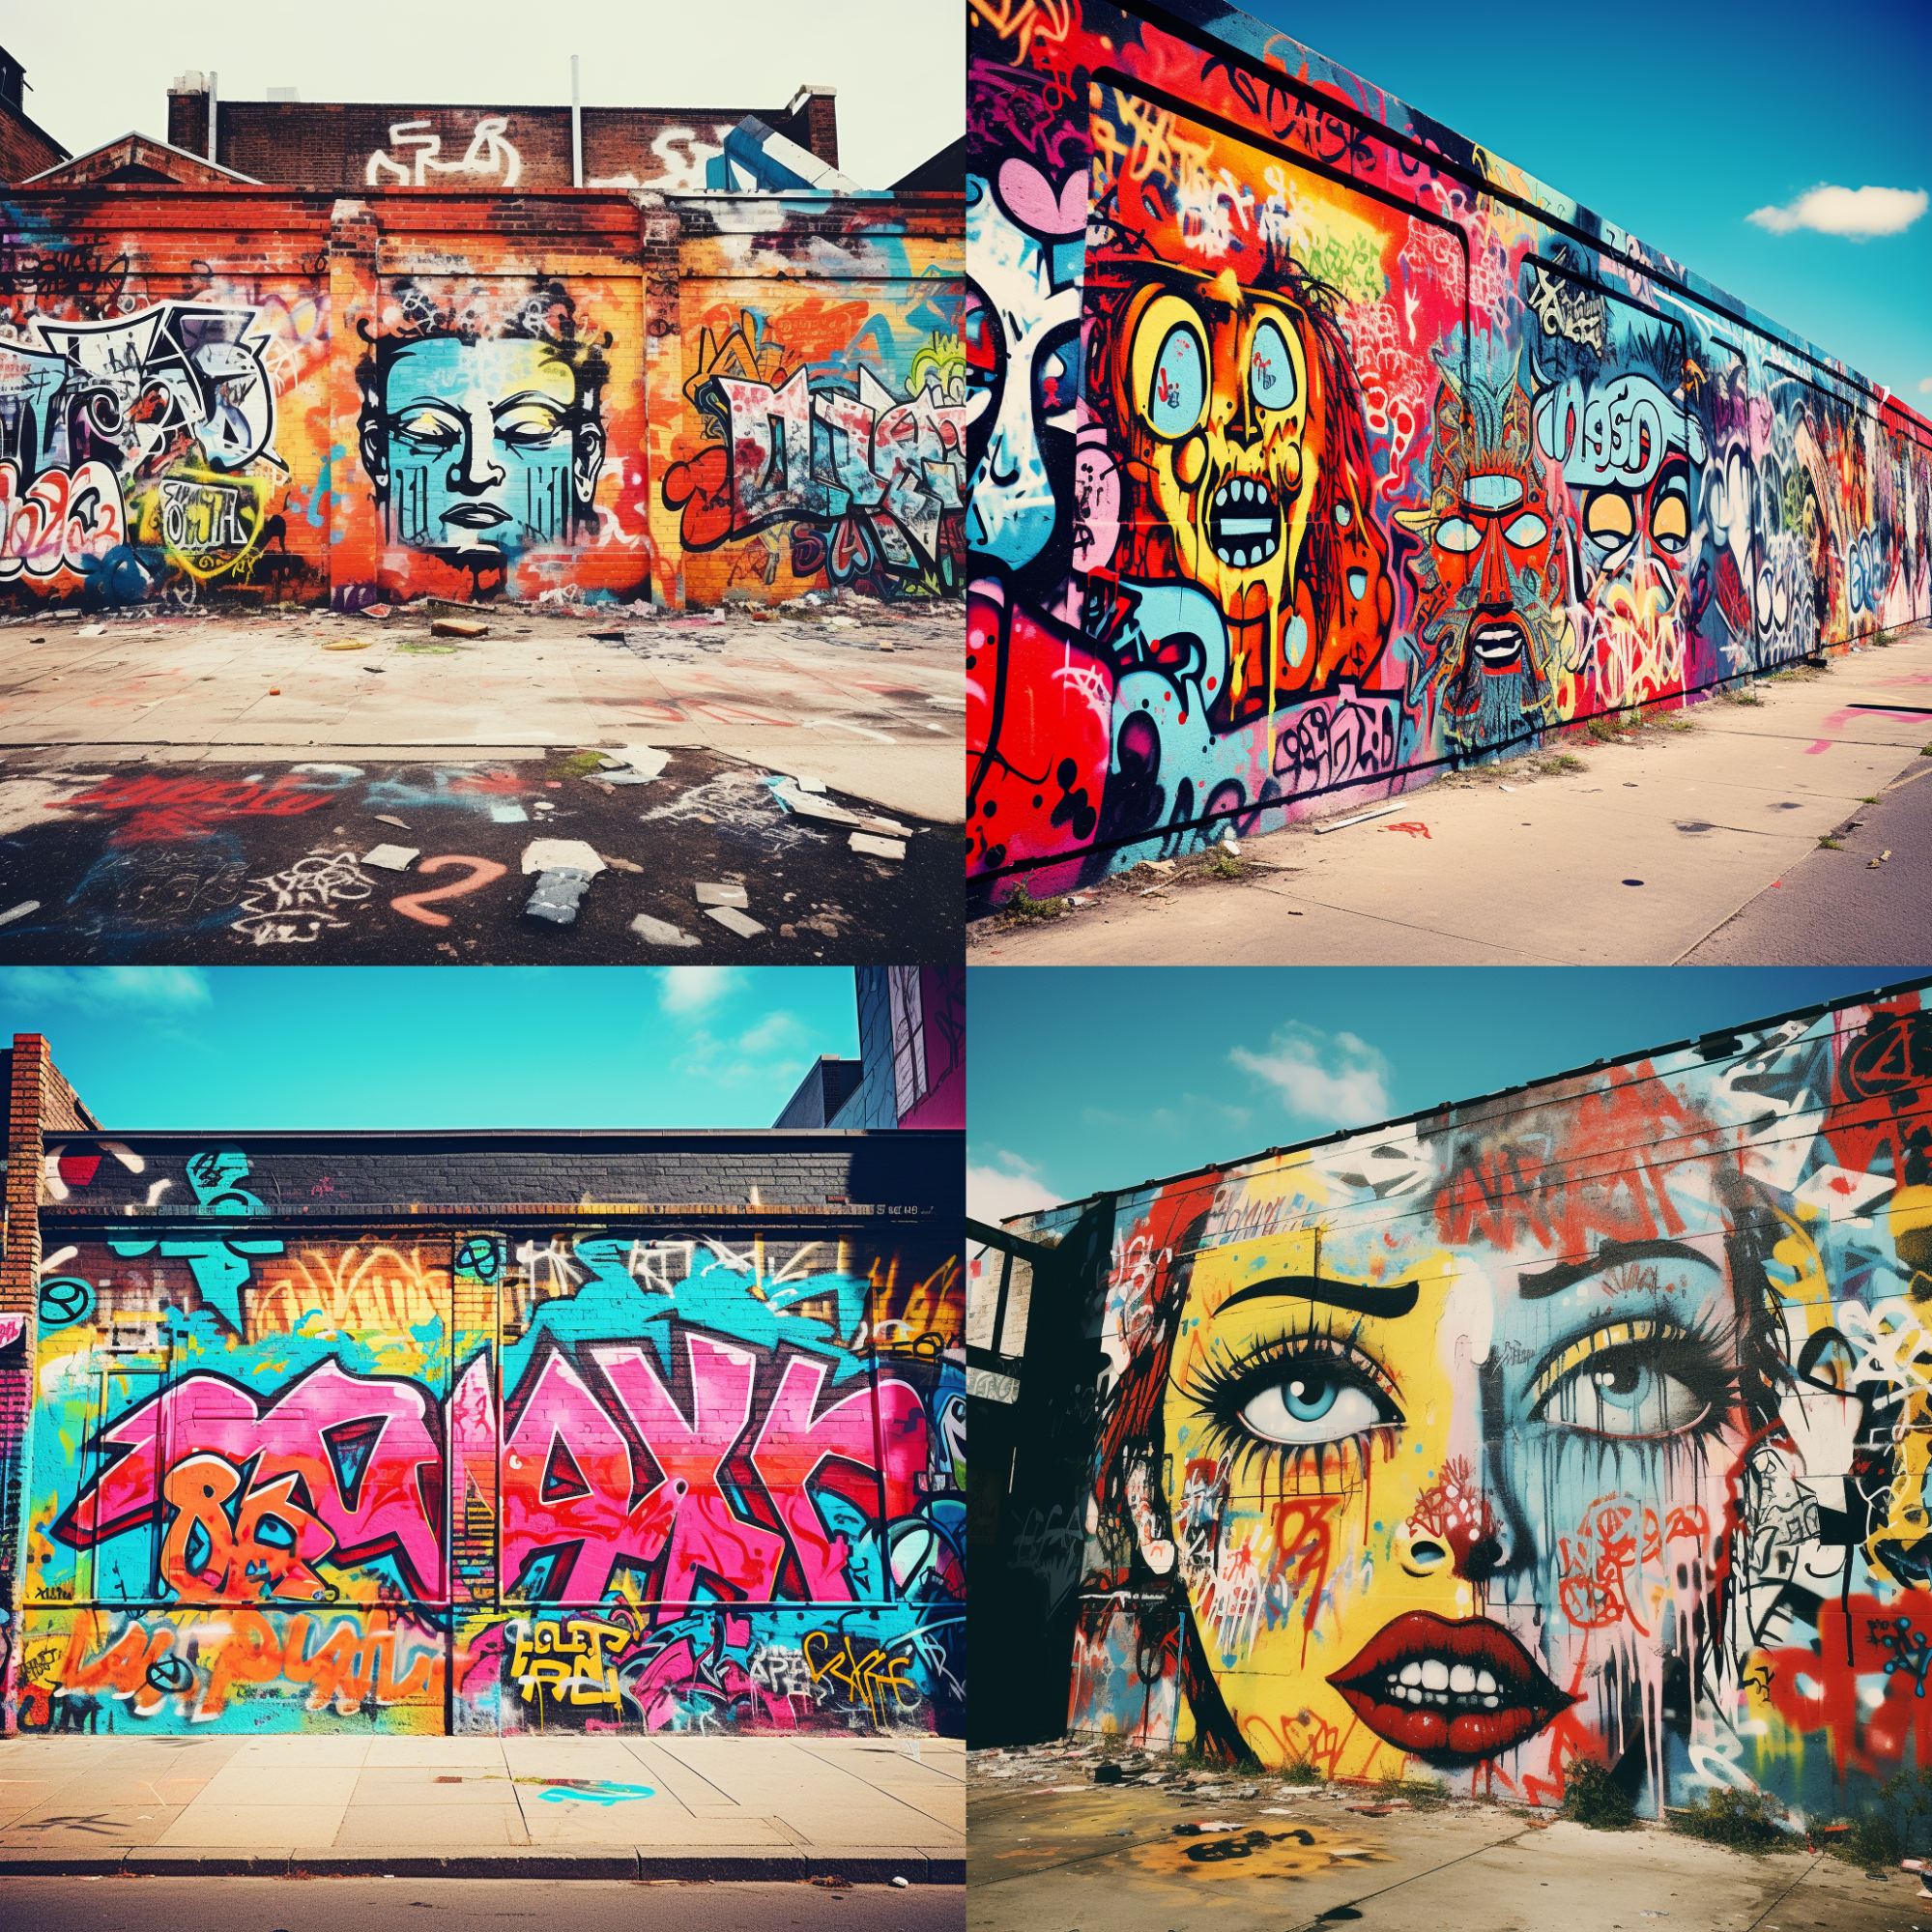 Four image options generated by Midjourney based on an urban graffiti prompt